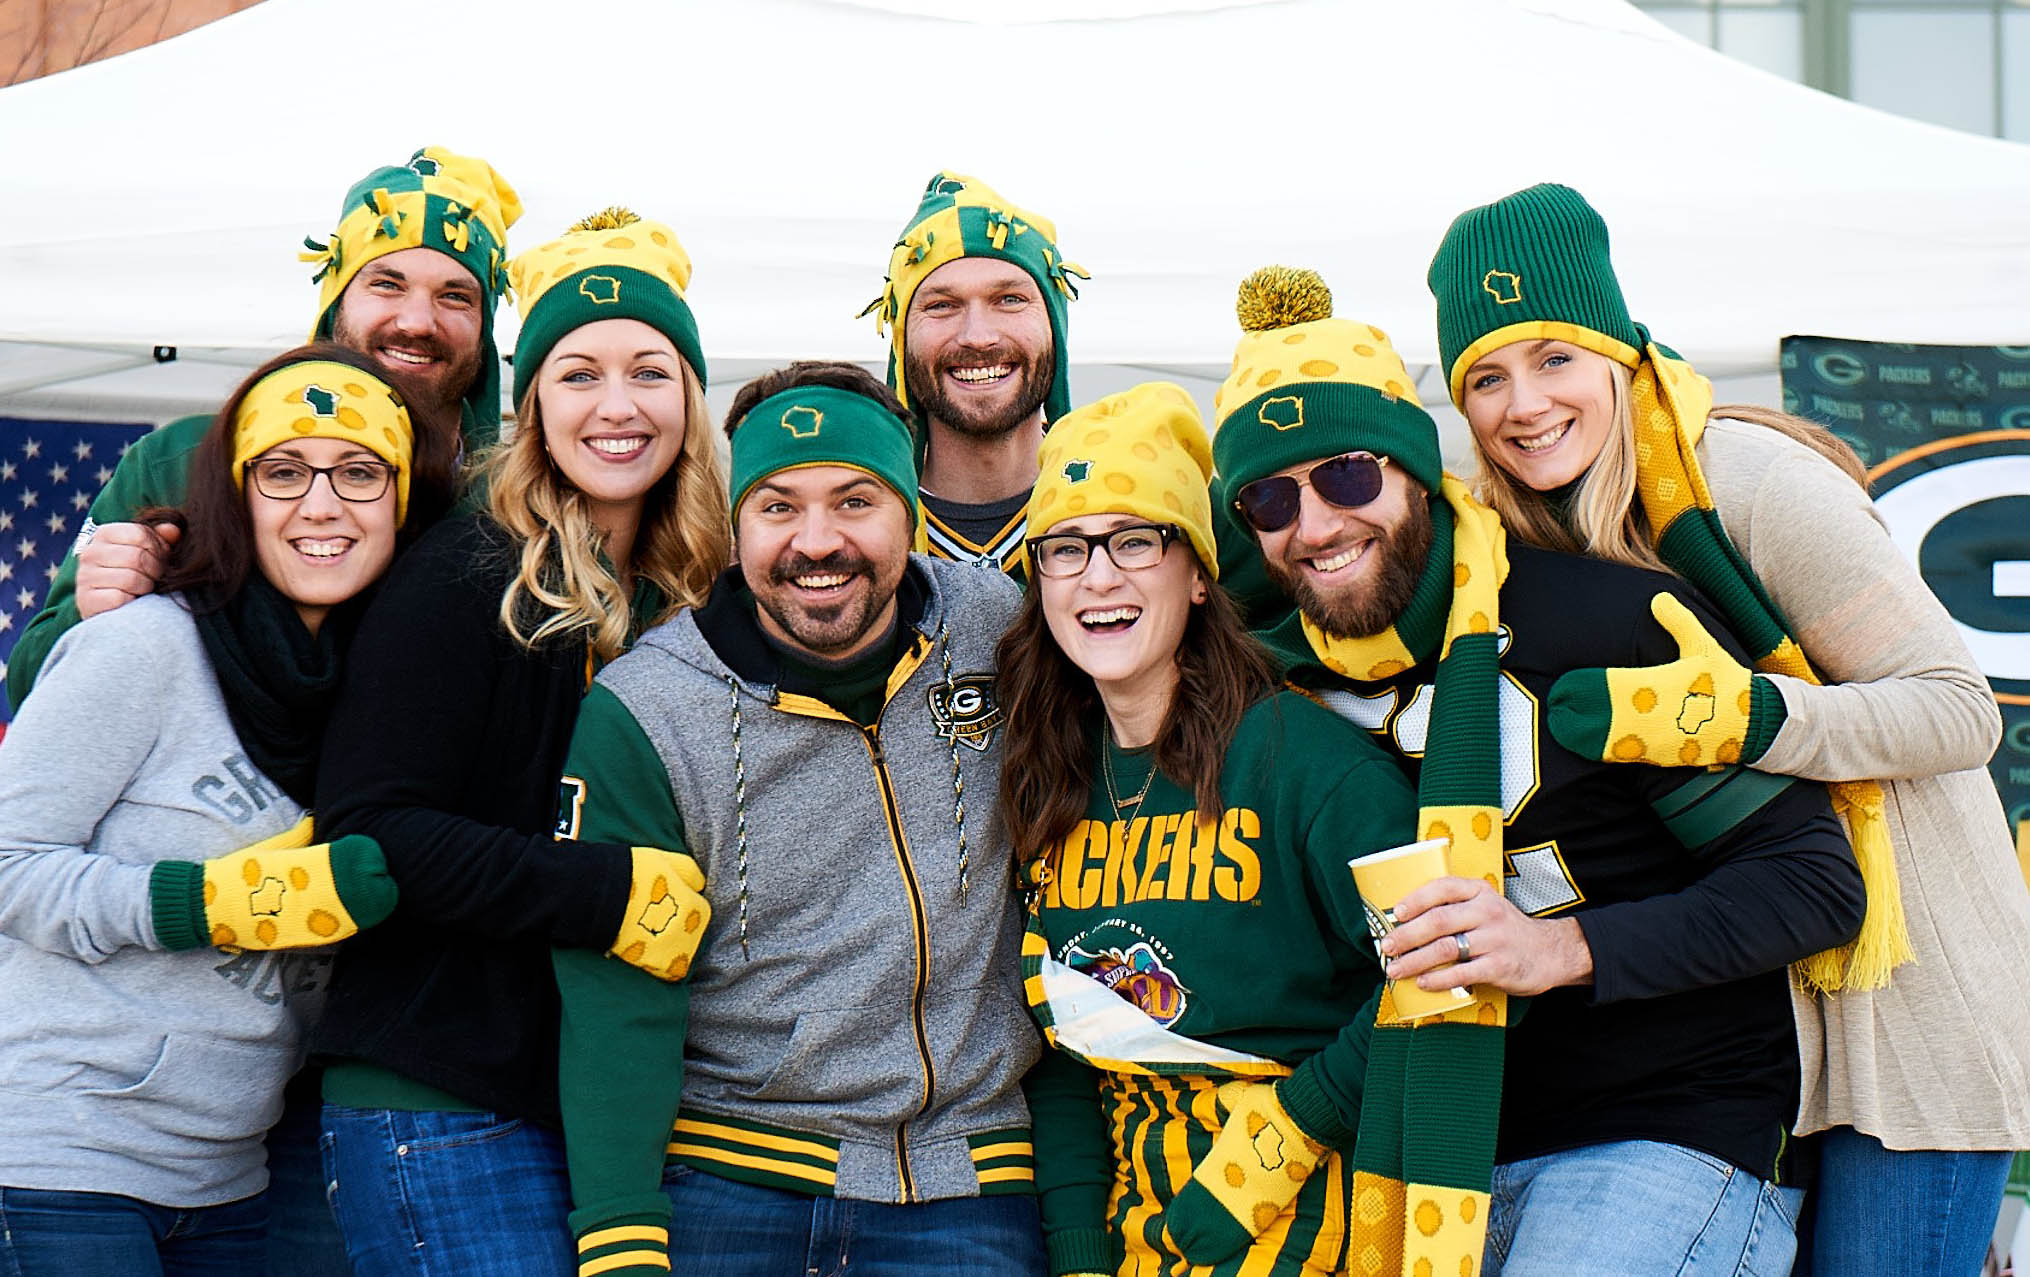 Unique knit accessories for Packer fans. | Cheese Knits